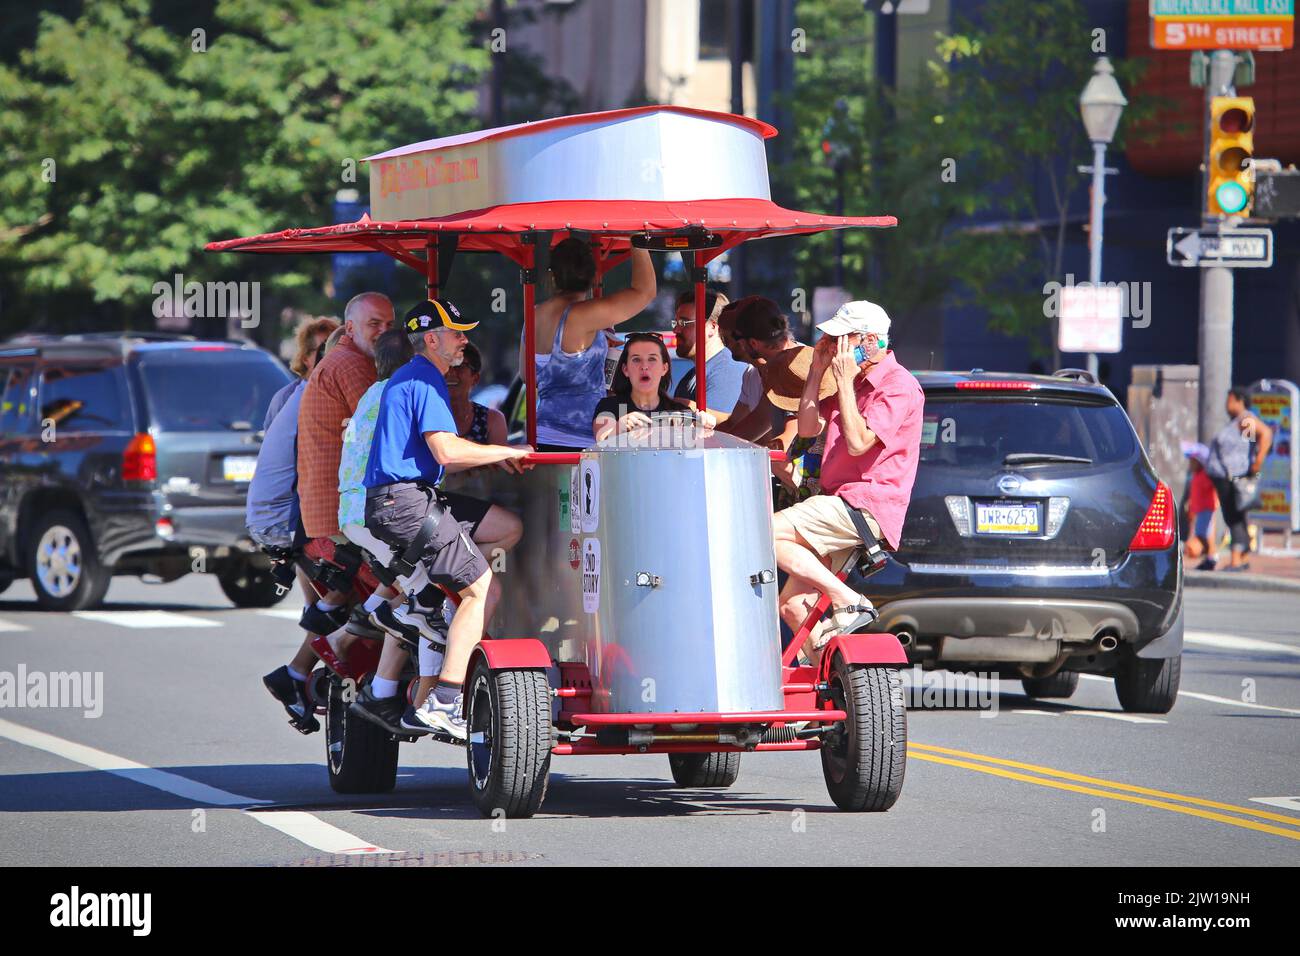 The unique Big Red Pedicycle is a bicycle bus carrying 15 assengers, powered by passengers' pedaling.  Philadelphia, USA - August 2019 Stock Photo